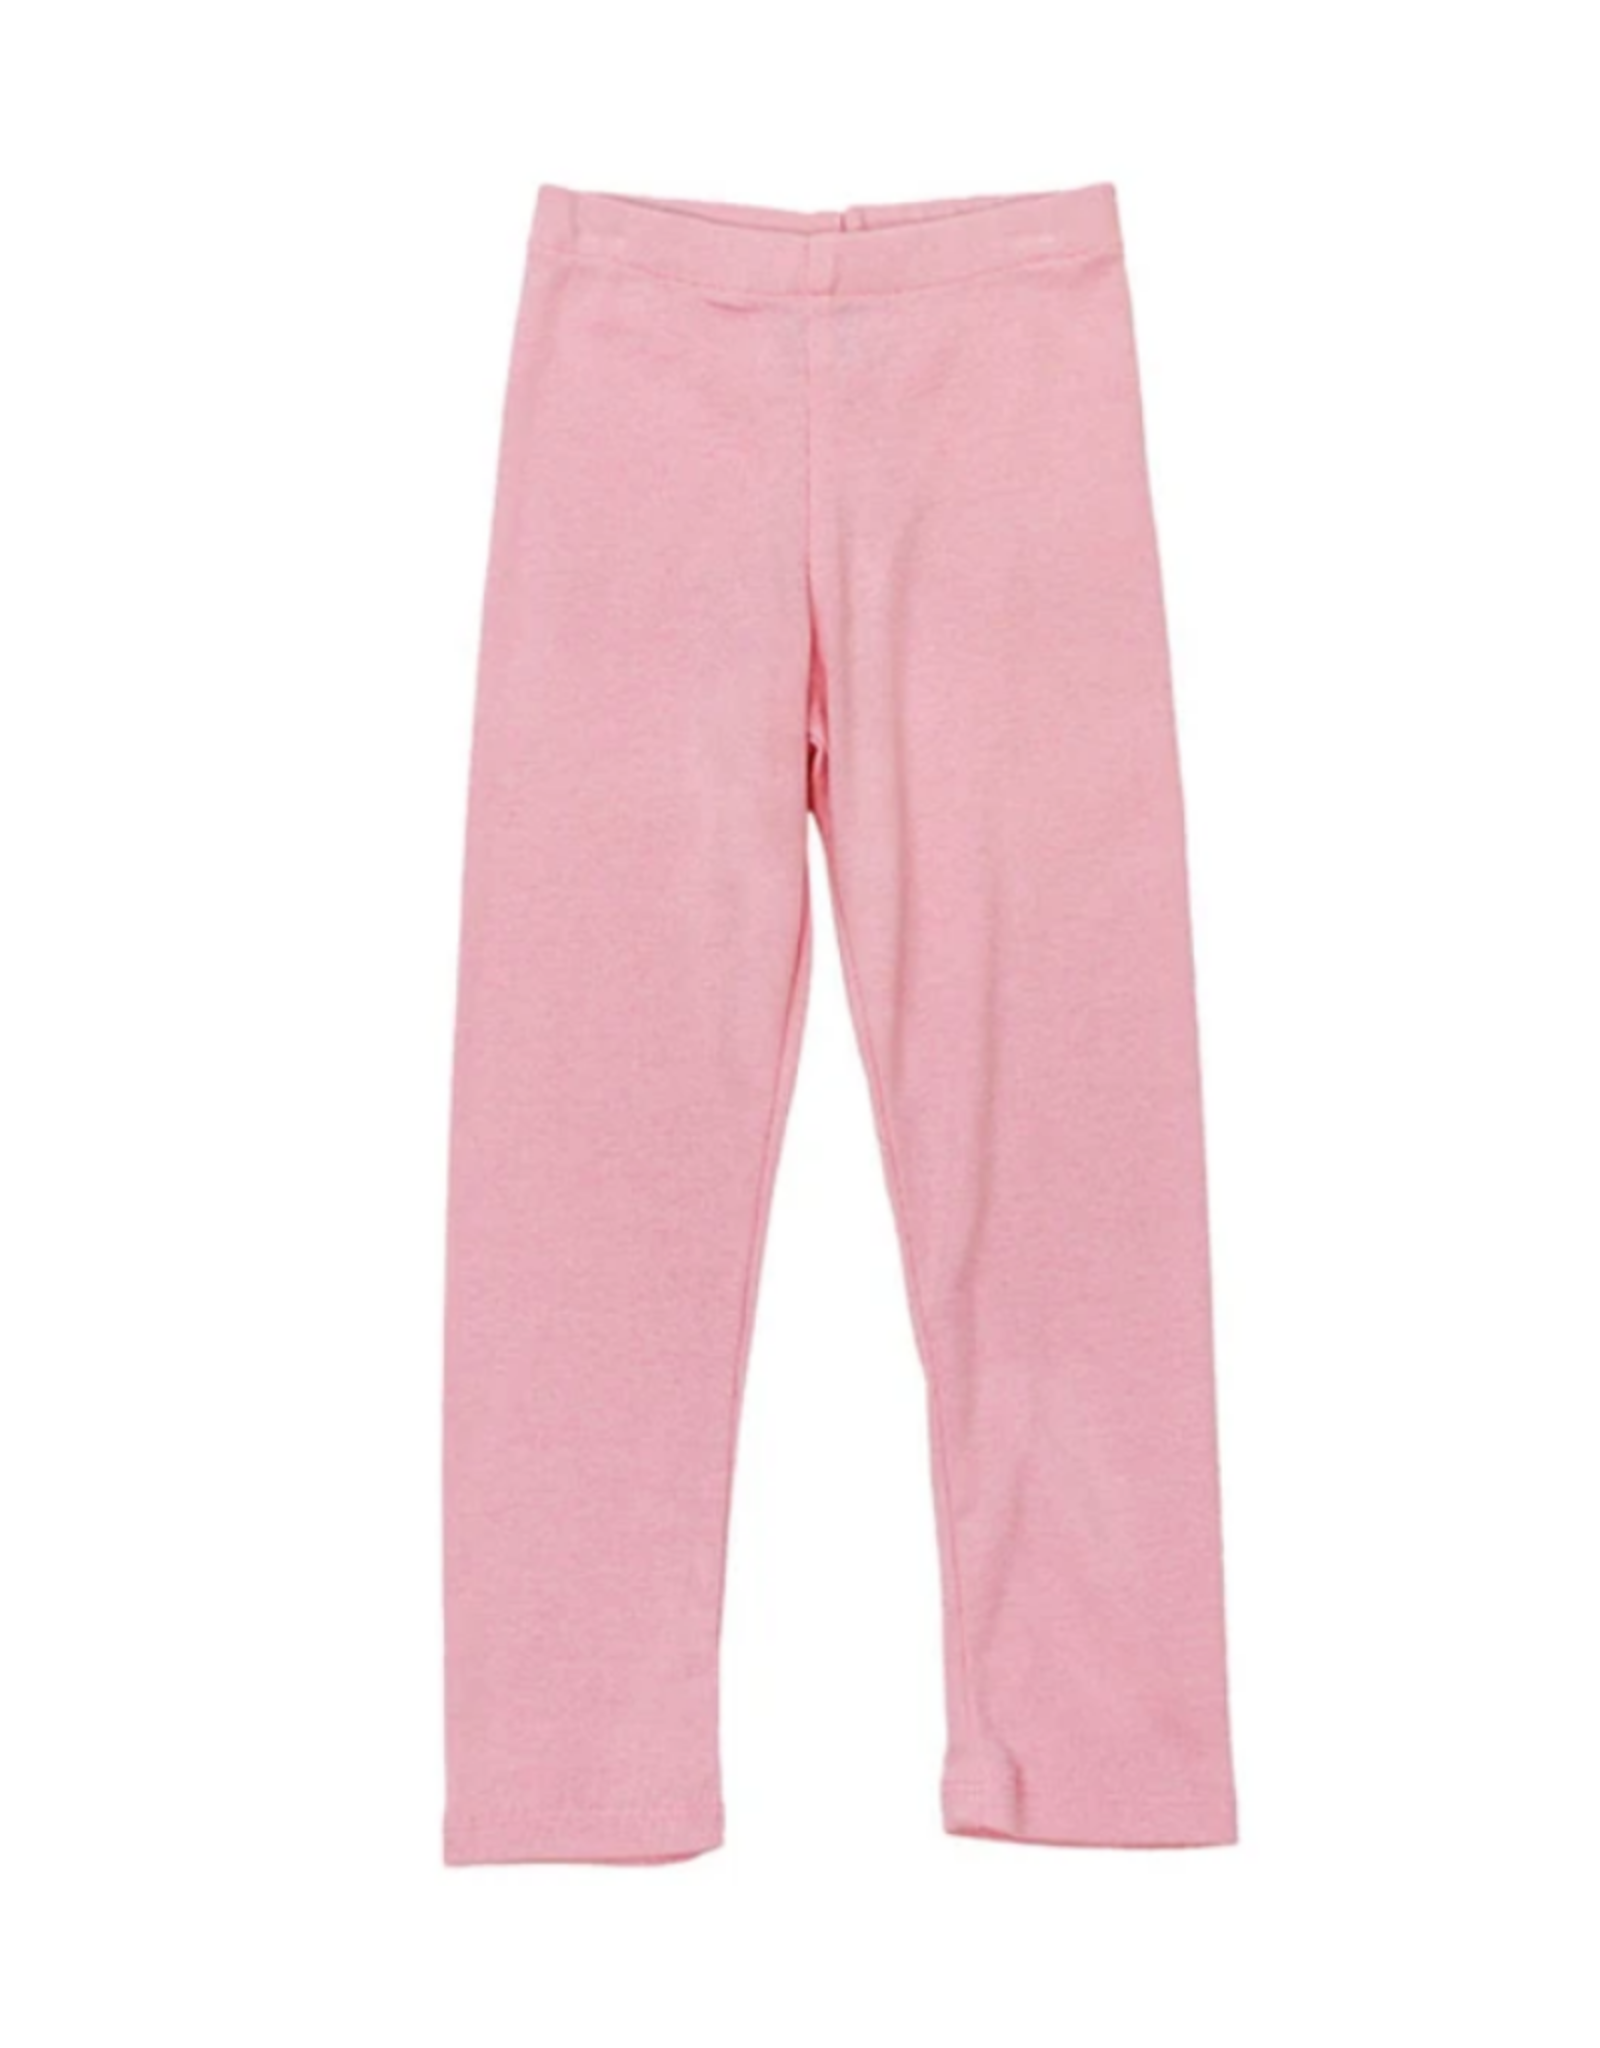 The Bailey Boys Pink Knit Leggings